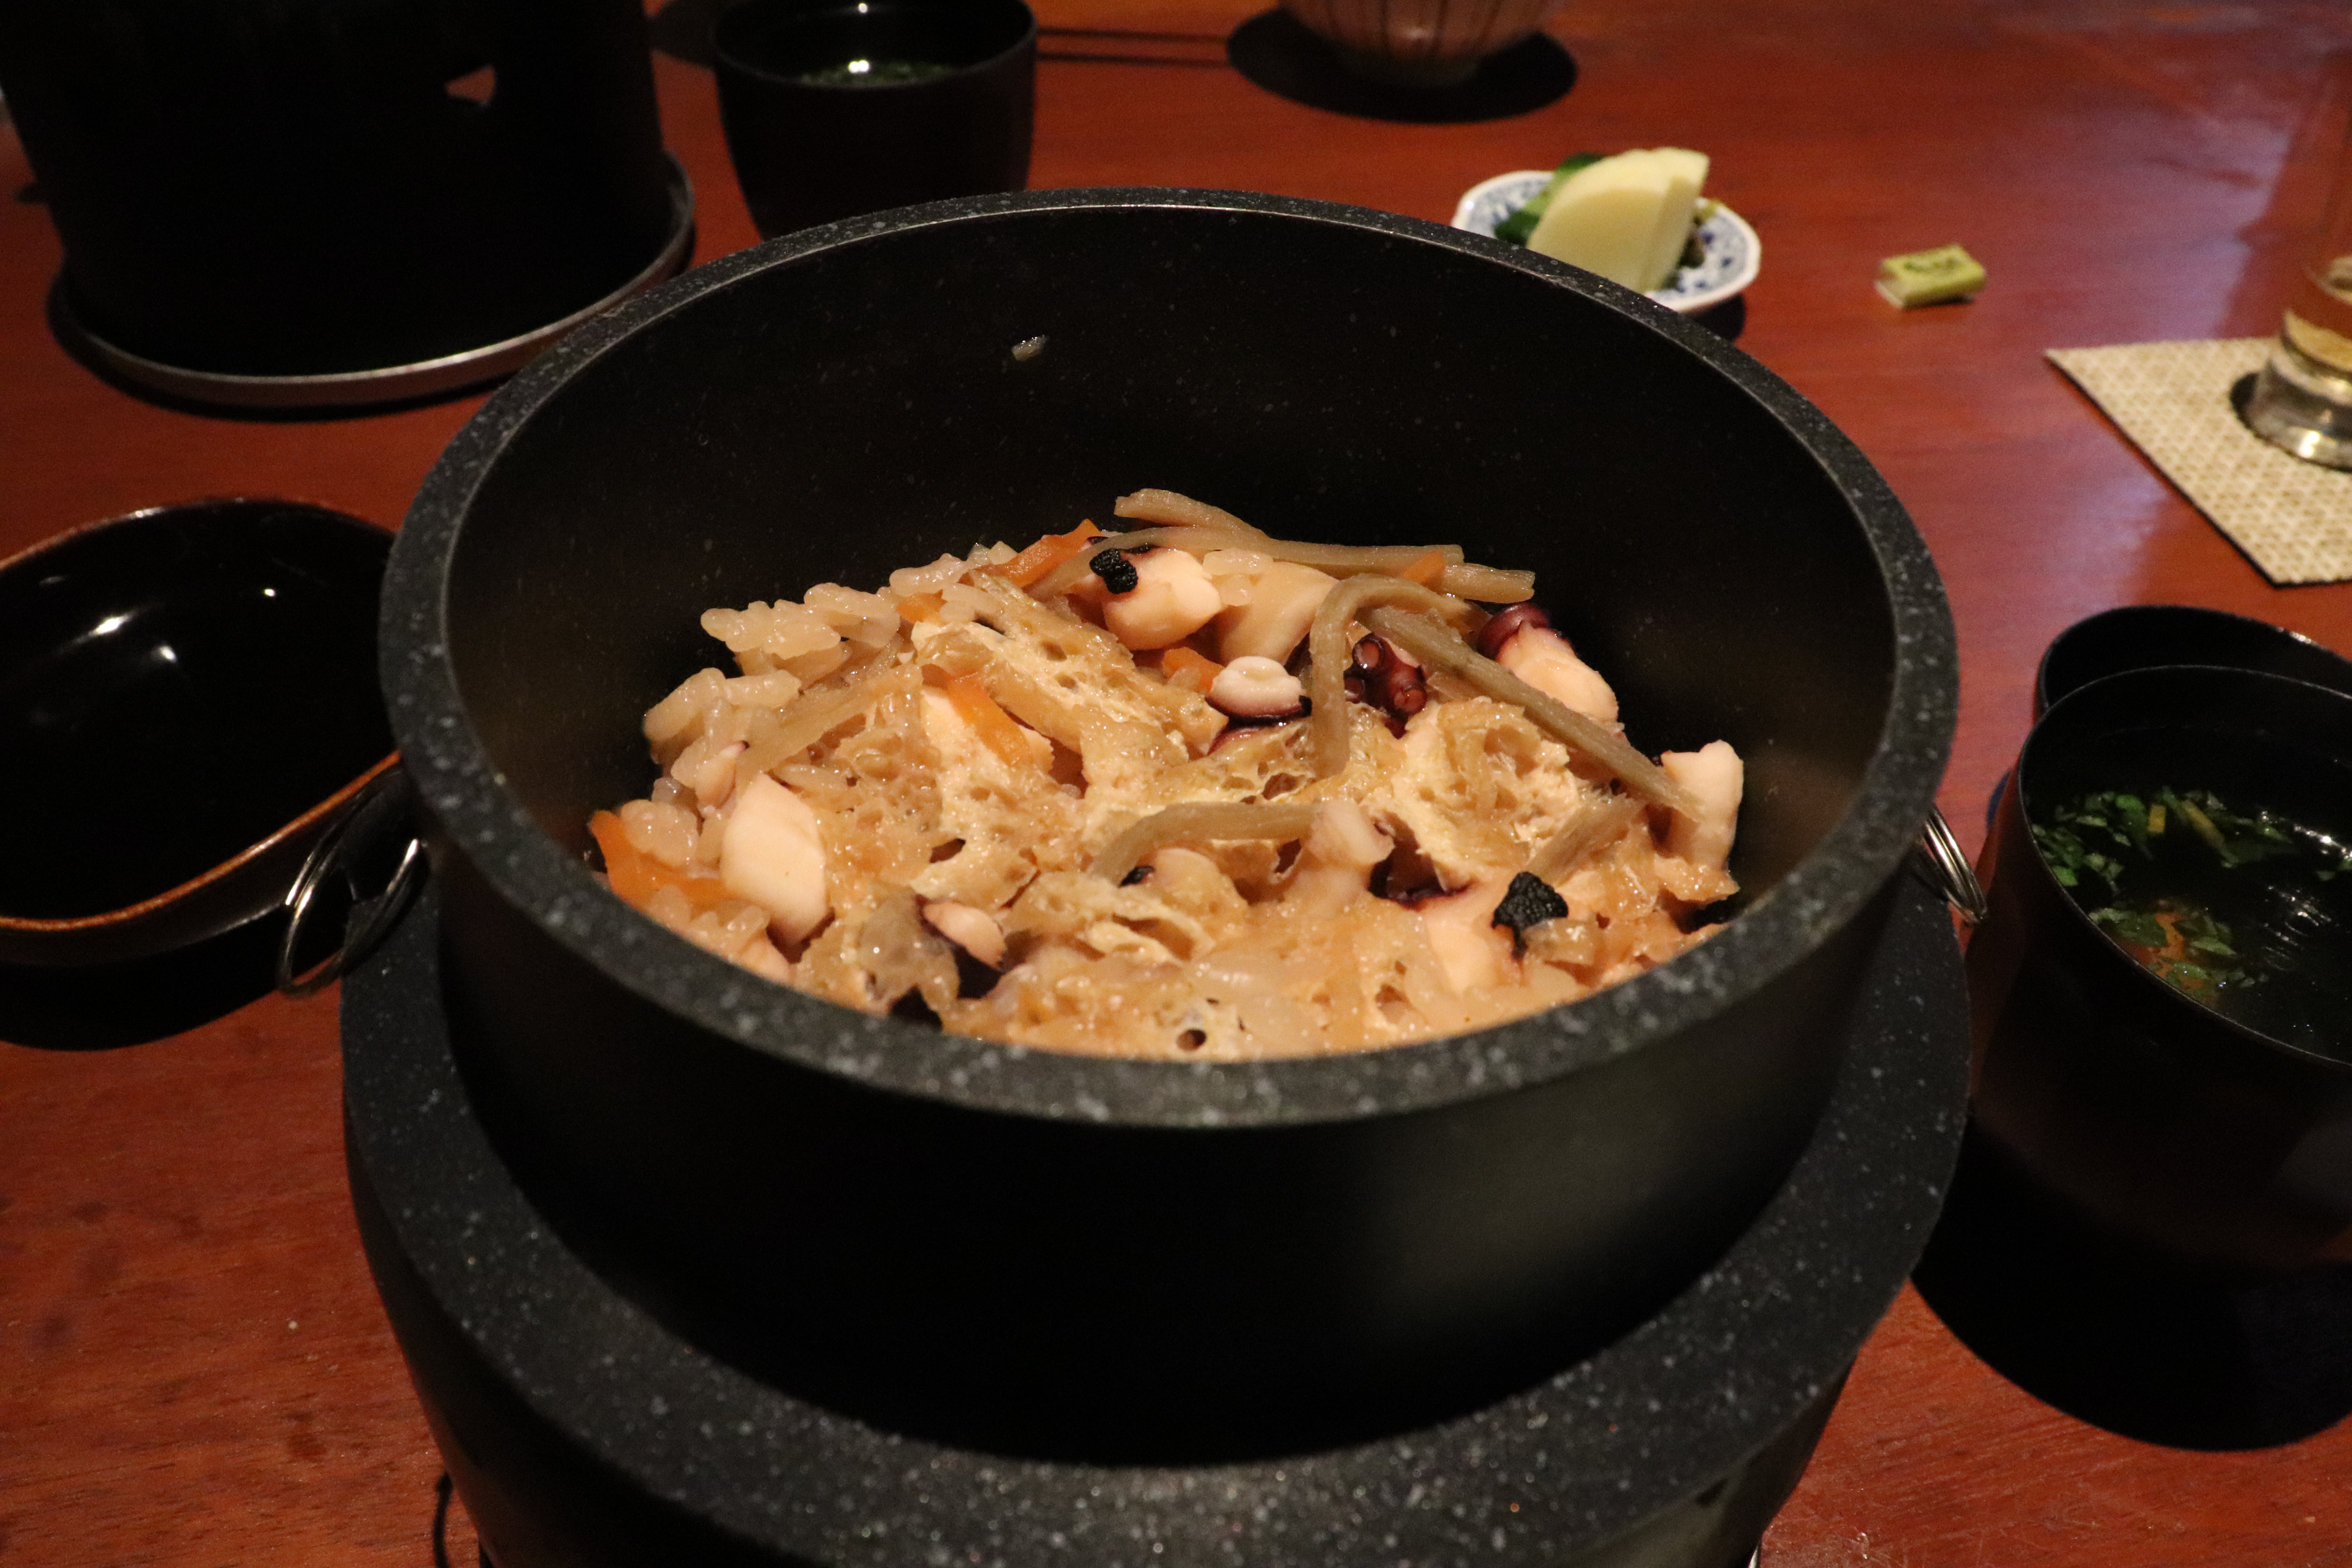 rice and octopus cooked in an earthenware pot